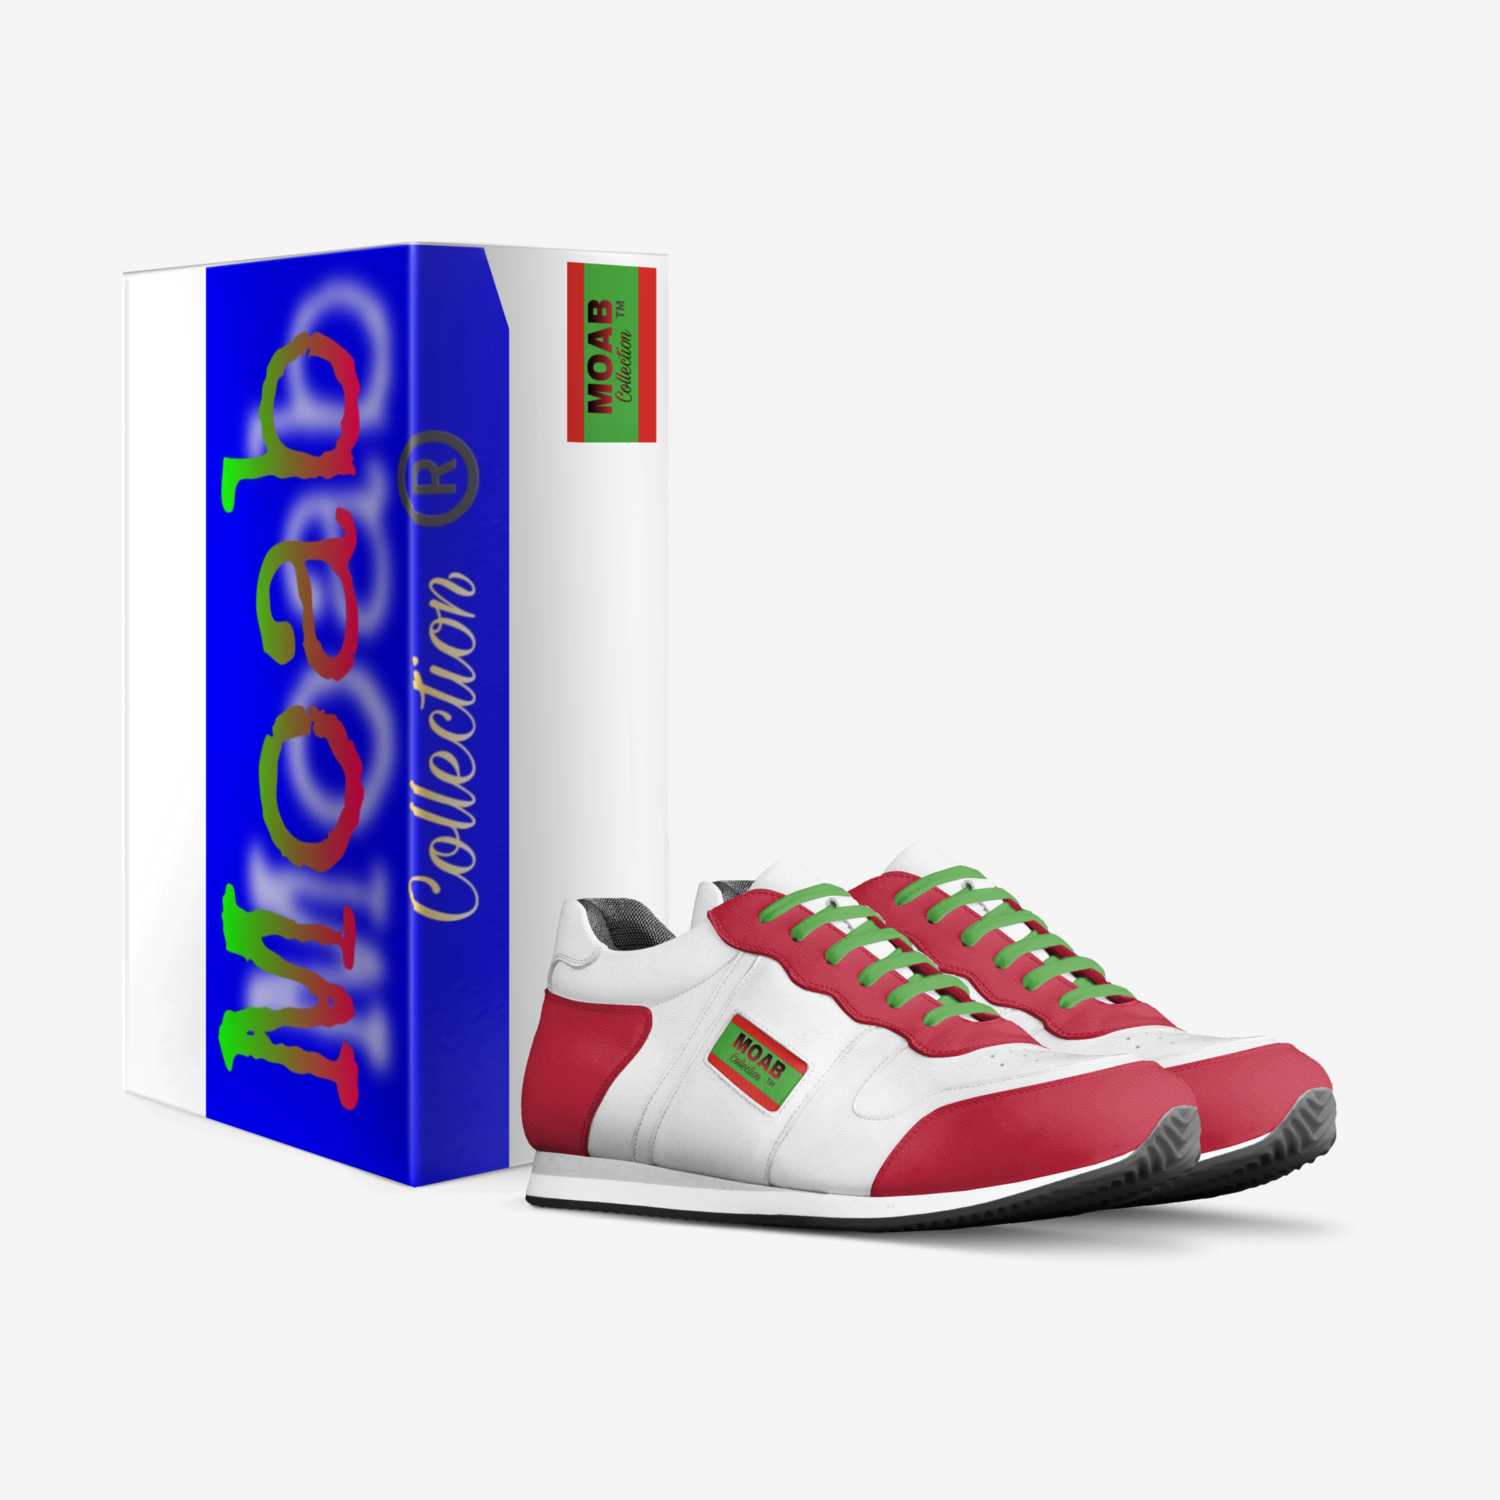 Moab custom made in Italy shoes by Nasir Ma'At-el | Box view